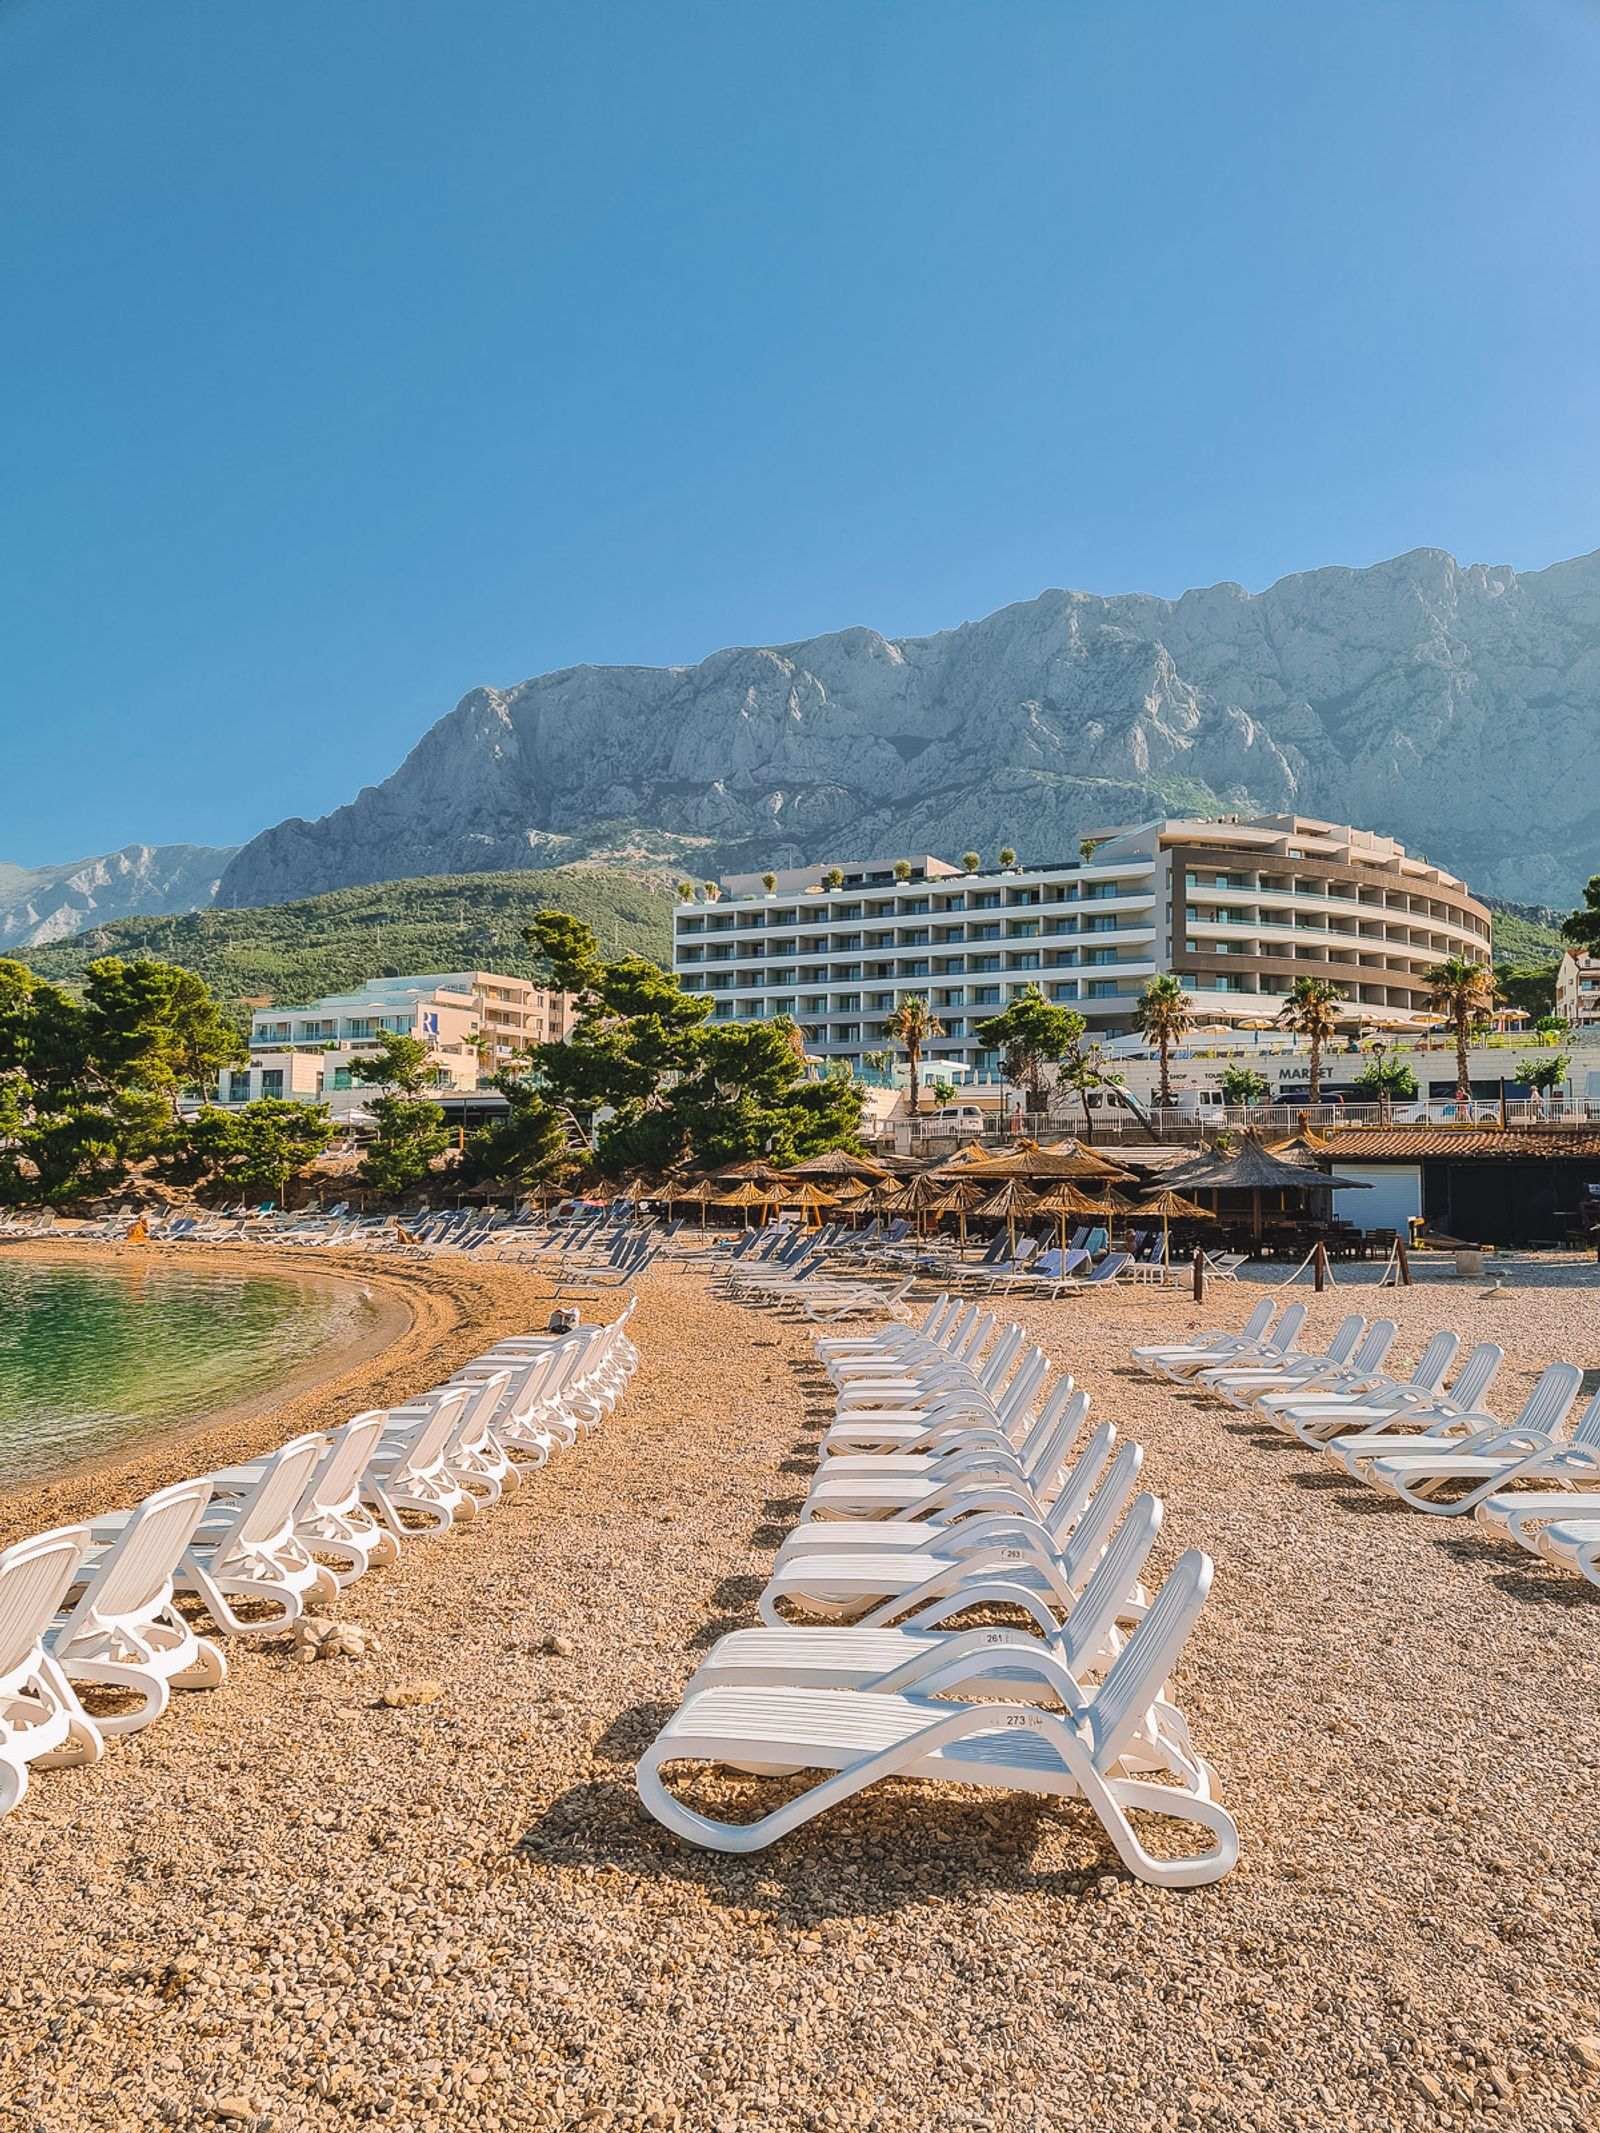 many white sun loungers laid out on the beach with hotels in the background and mountains towering over the town